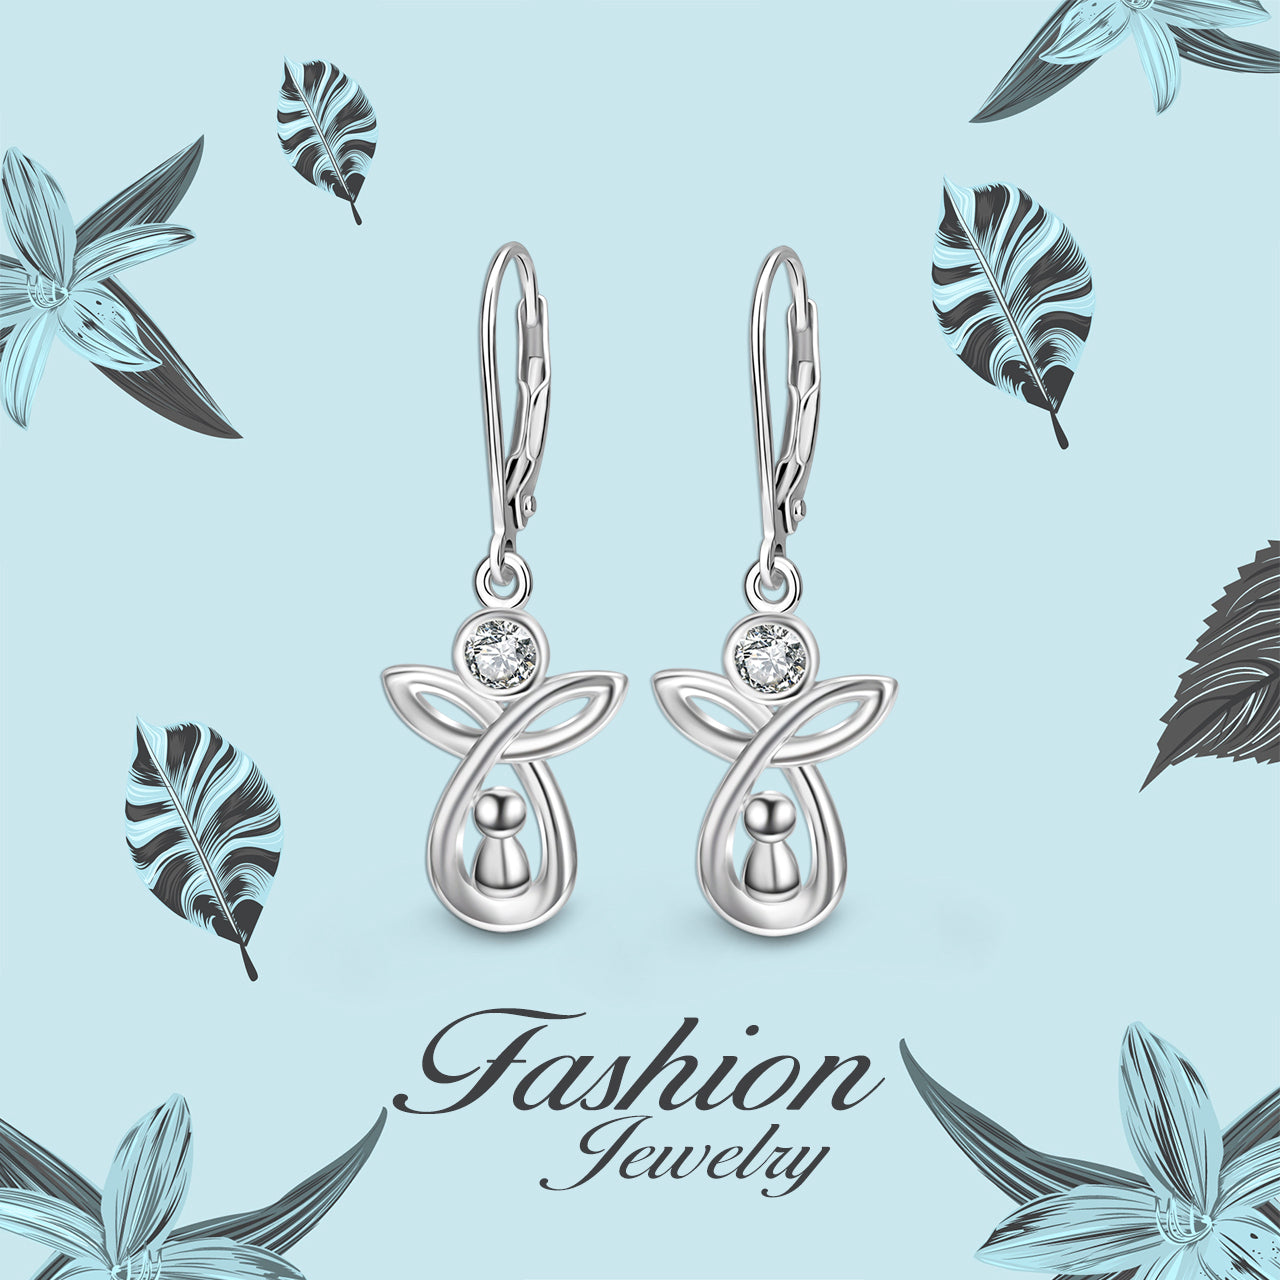 Smart Earrings White Gold Plated Earrings With Angel